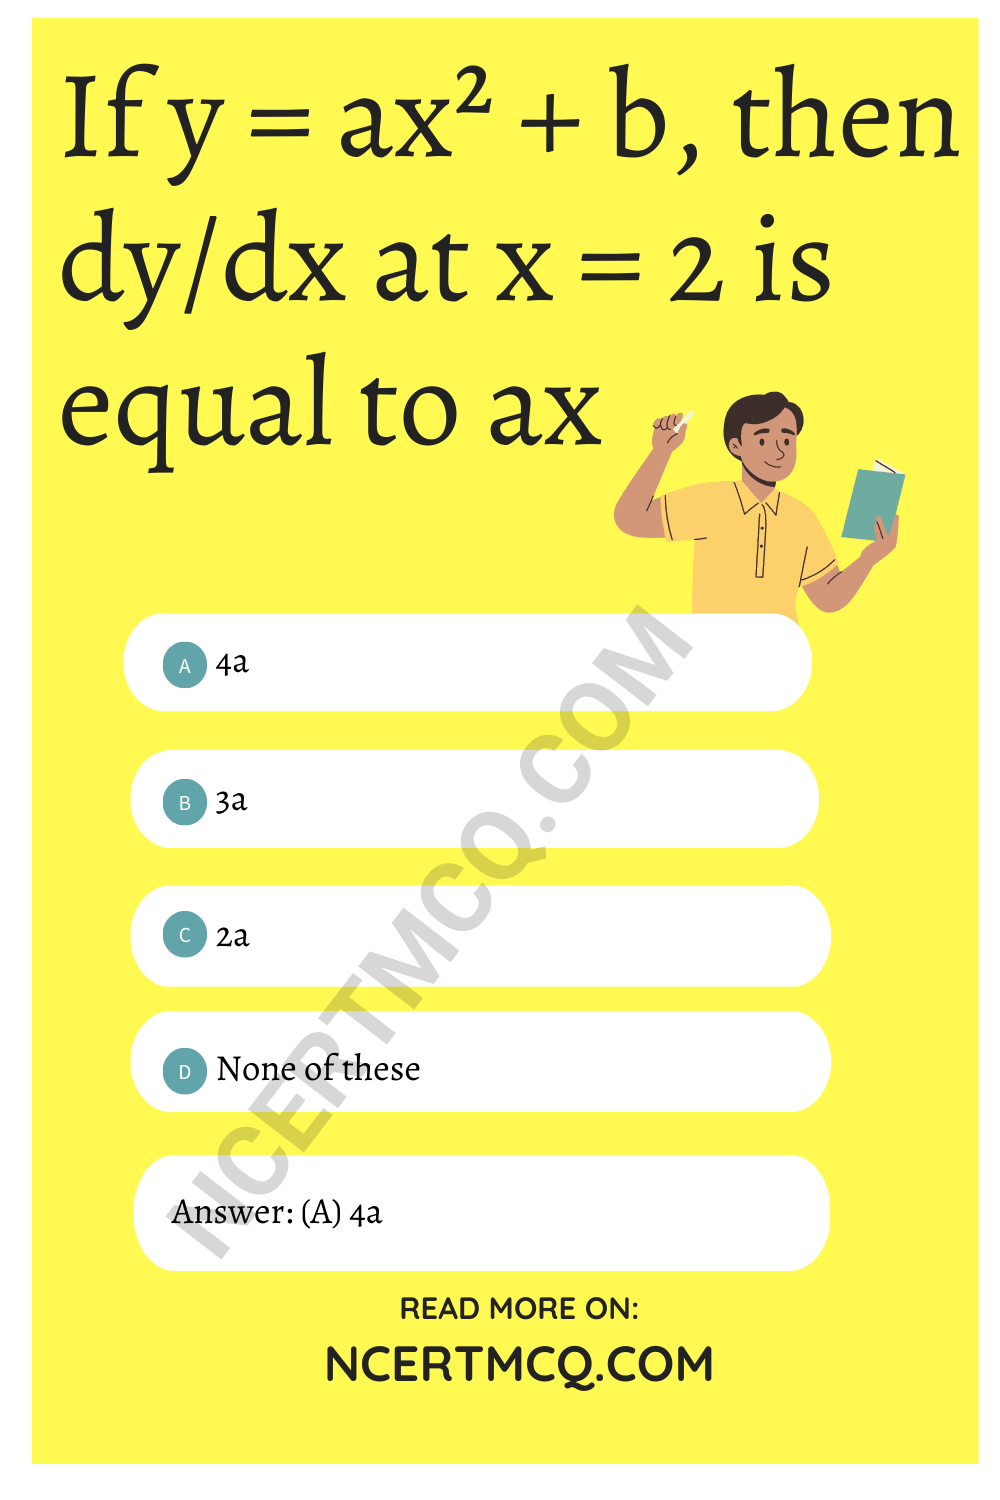 If y = ax² + b, then dy/dx at x = 2 is equal to ax